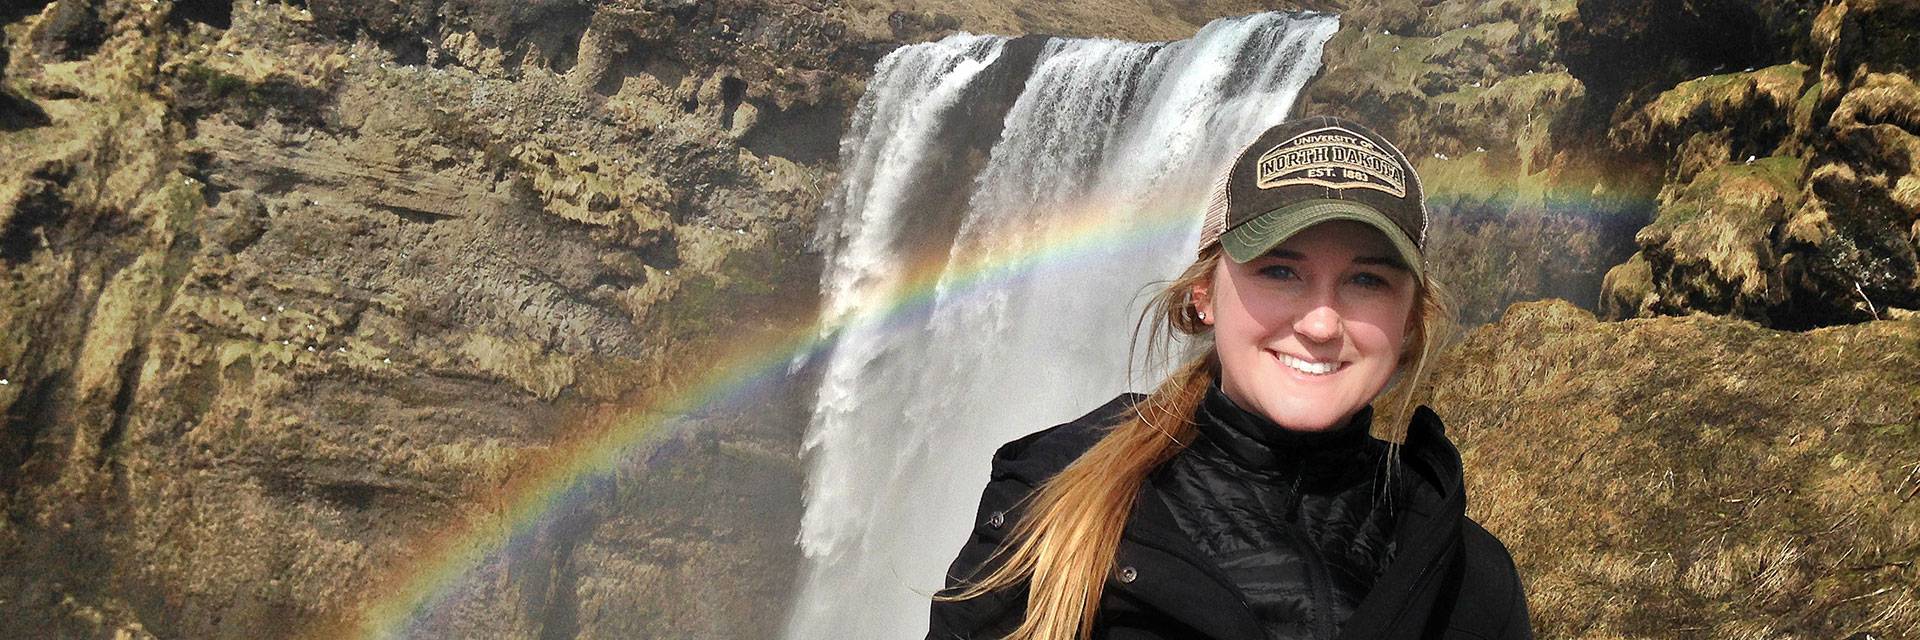 UND student at Iceland waterfall